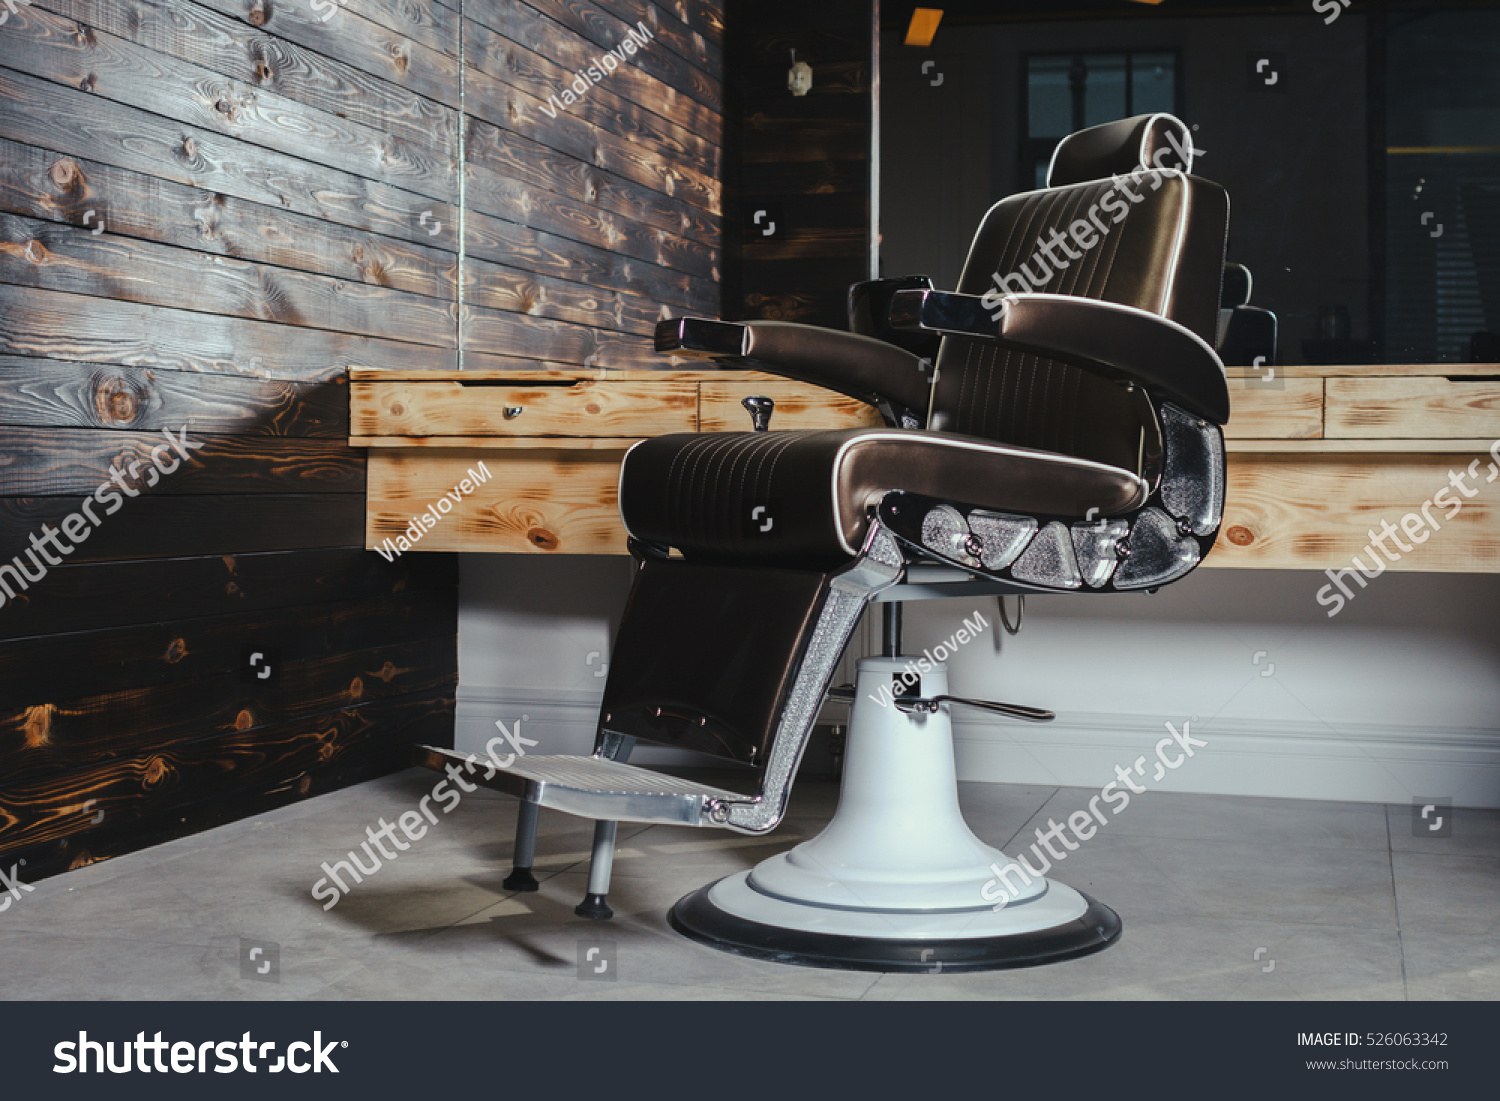 Stylish Vintage Barber Chair In Wooden Interior. Barbershop Theme #526063342